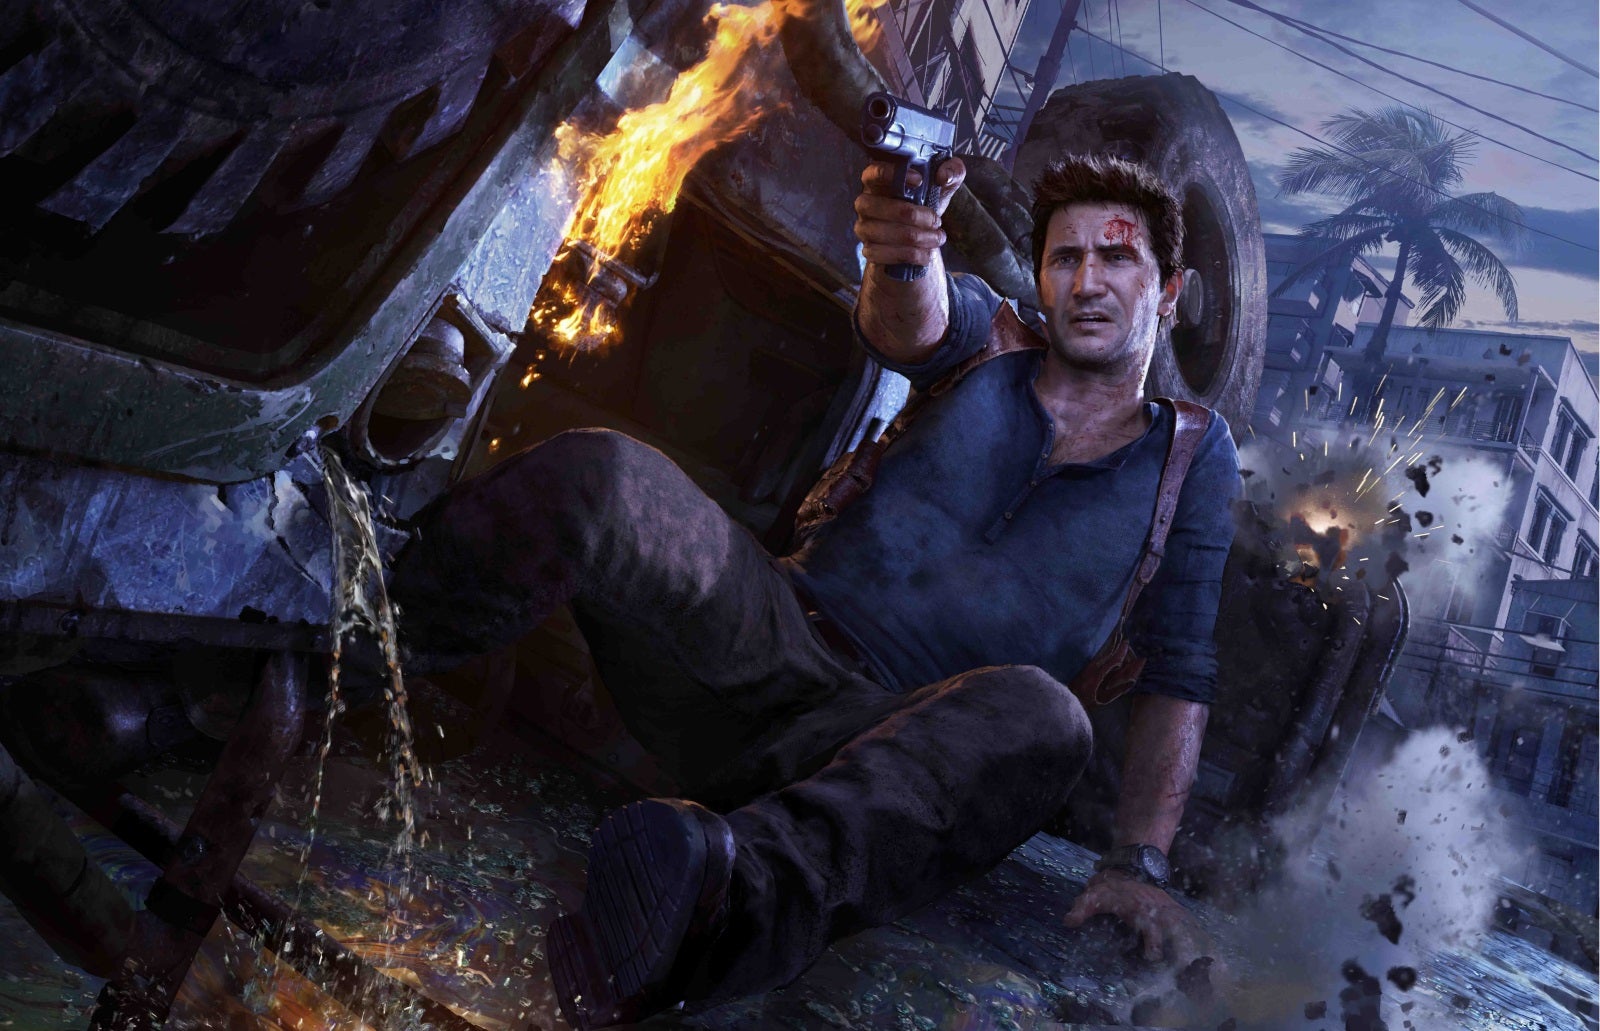 Image for Nathan Drake doesn’t actually take bullet damage in the Uncharted series